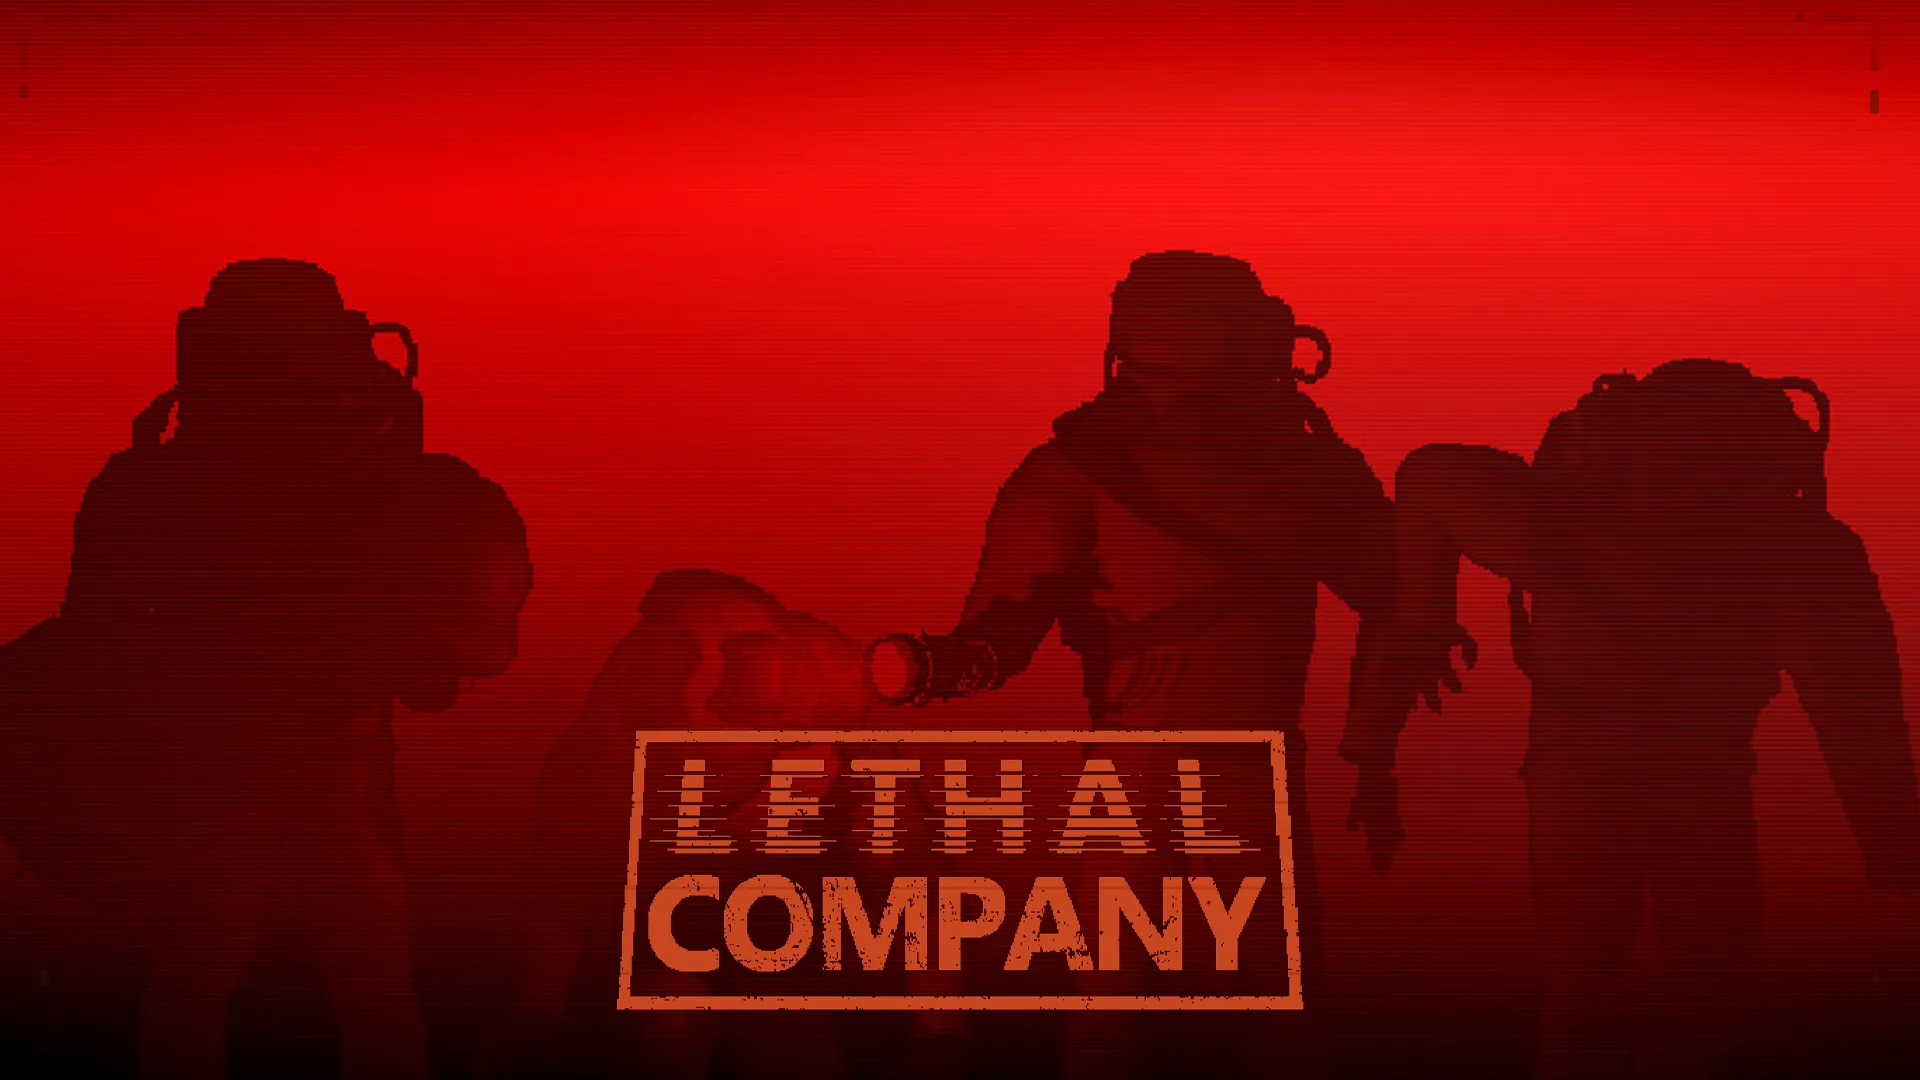 Lethal Company multiplayer mod: Play with more than 4 players. - Dot Esports